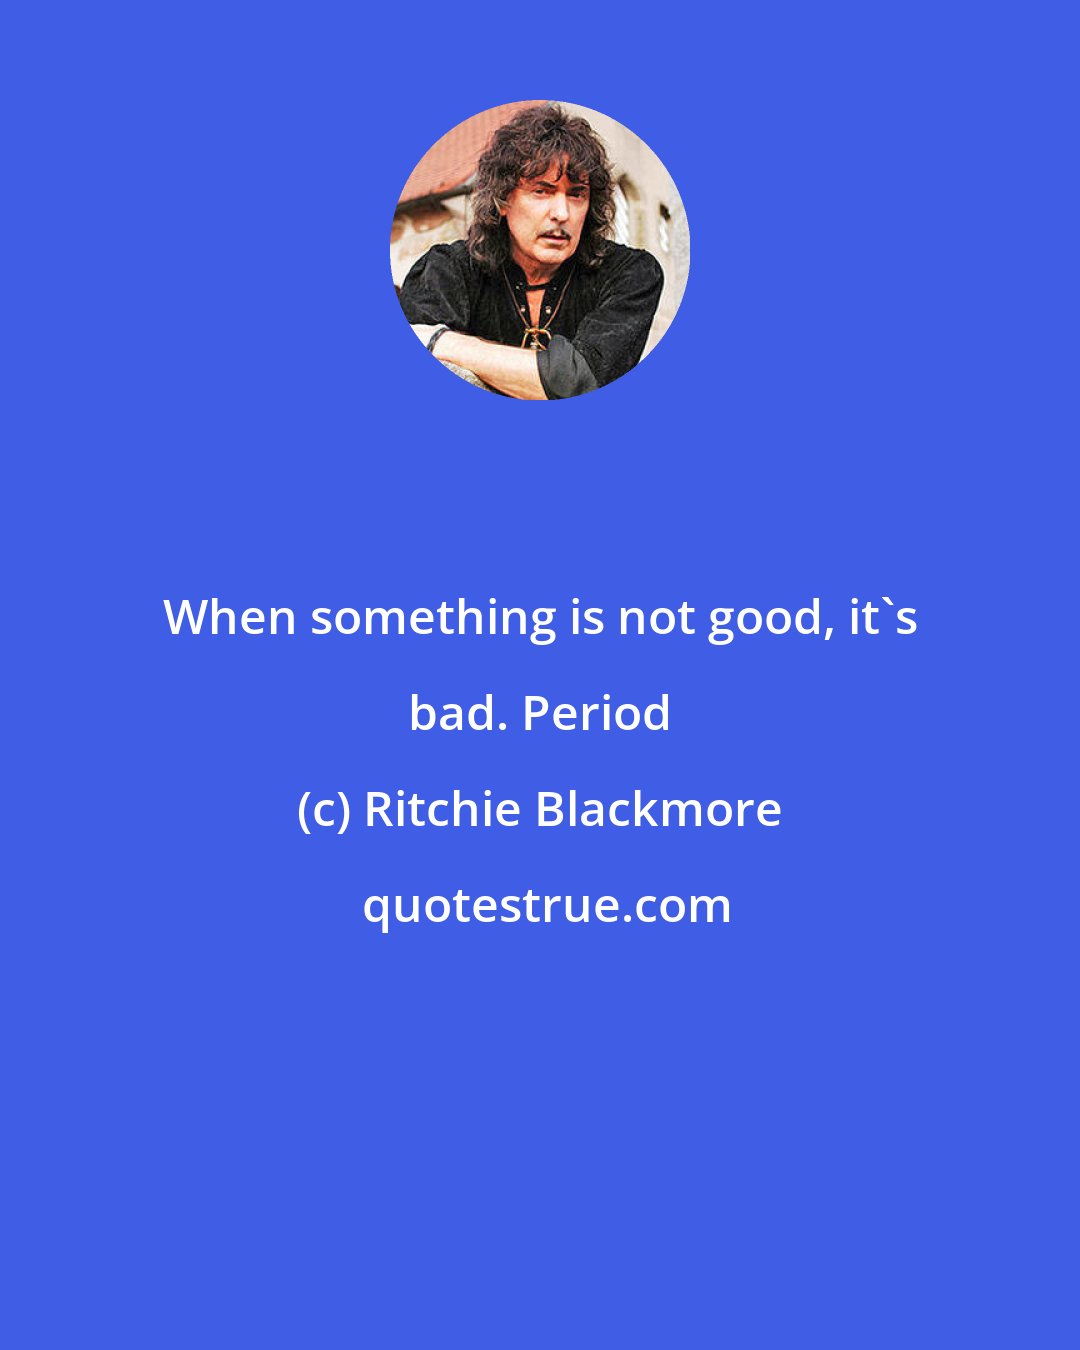 Ritchie Blackmore: When something is not good, it's bad. Period